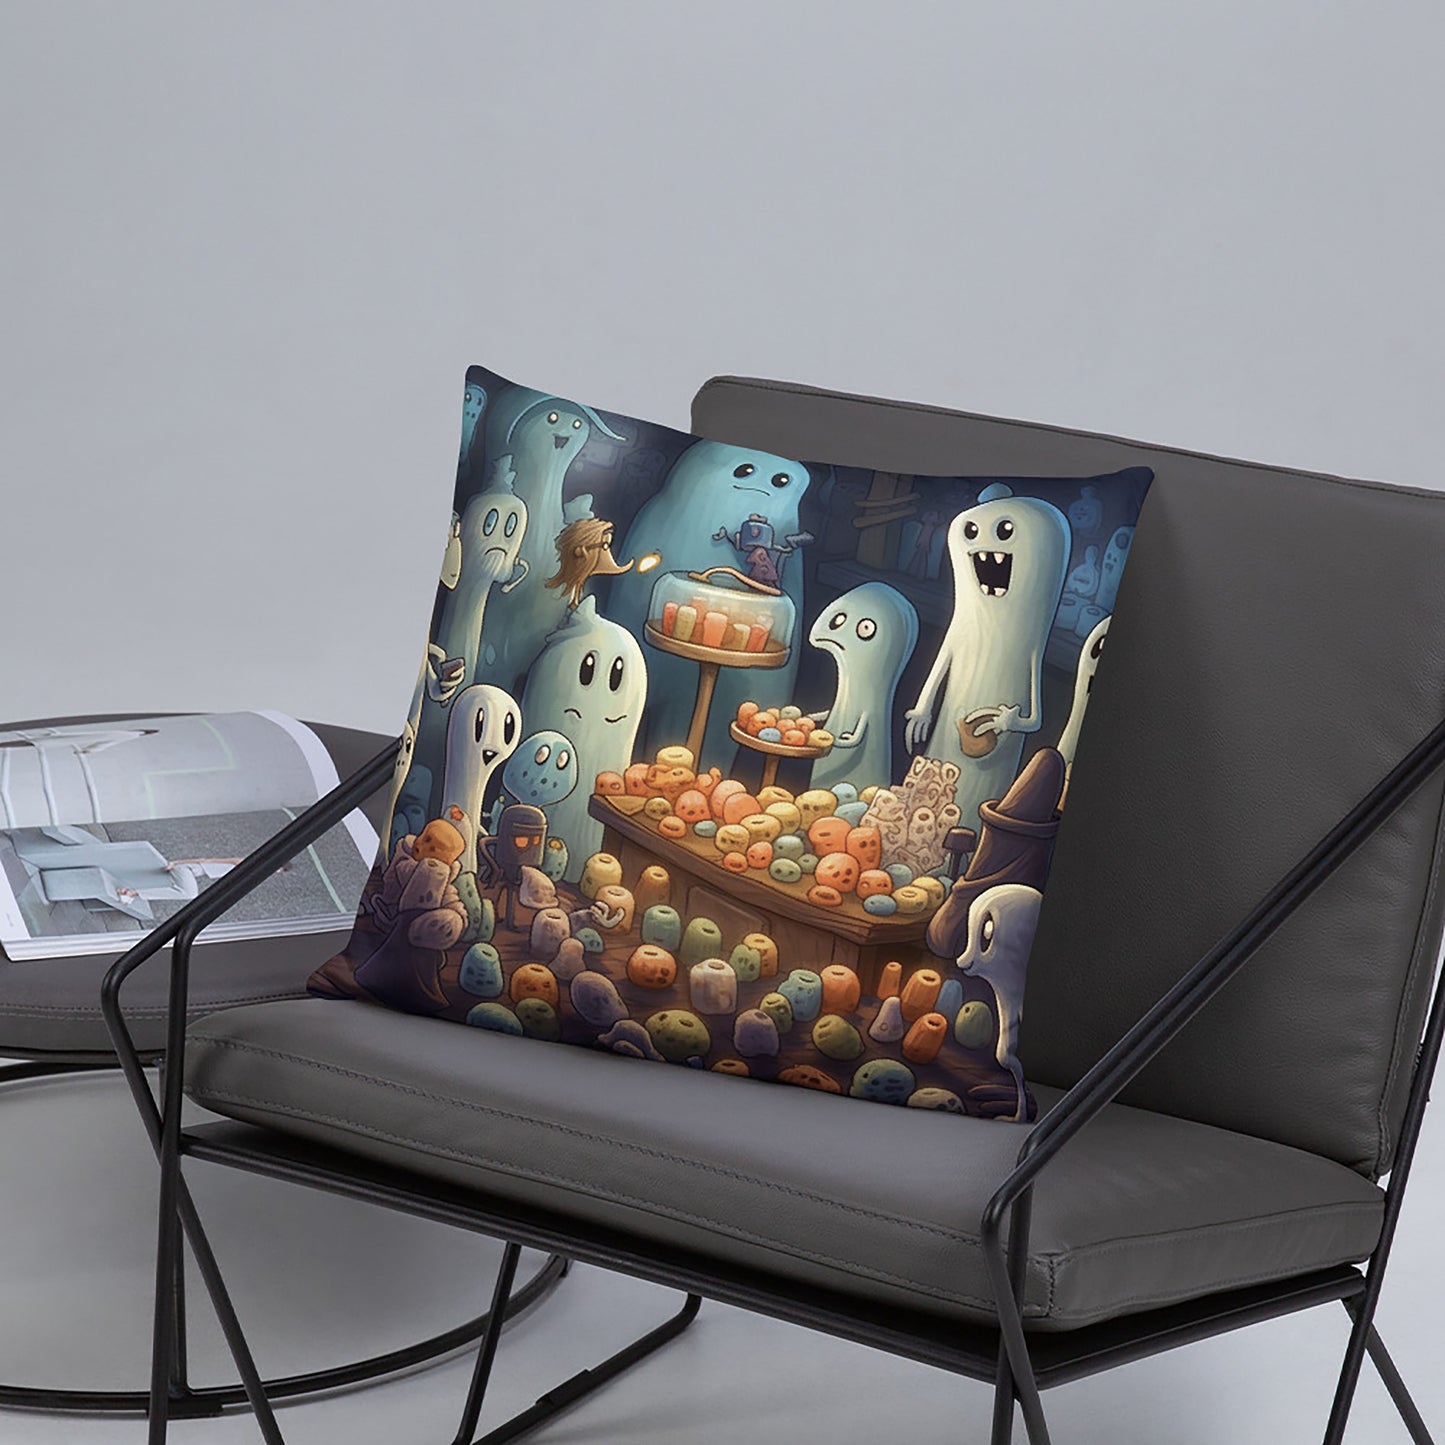 Halloween Throw Pillow Ghostly Shopkeepers Polyester Decorative Cushion 18x18